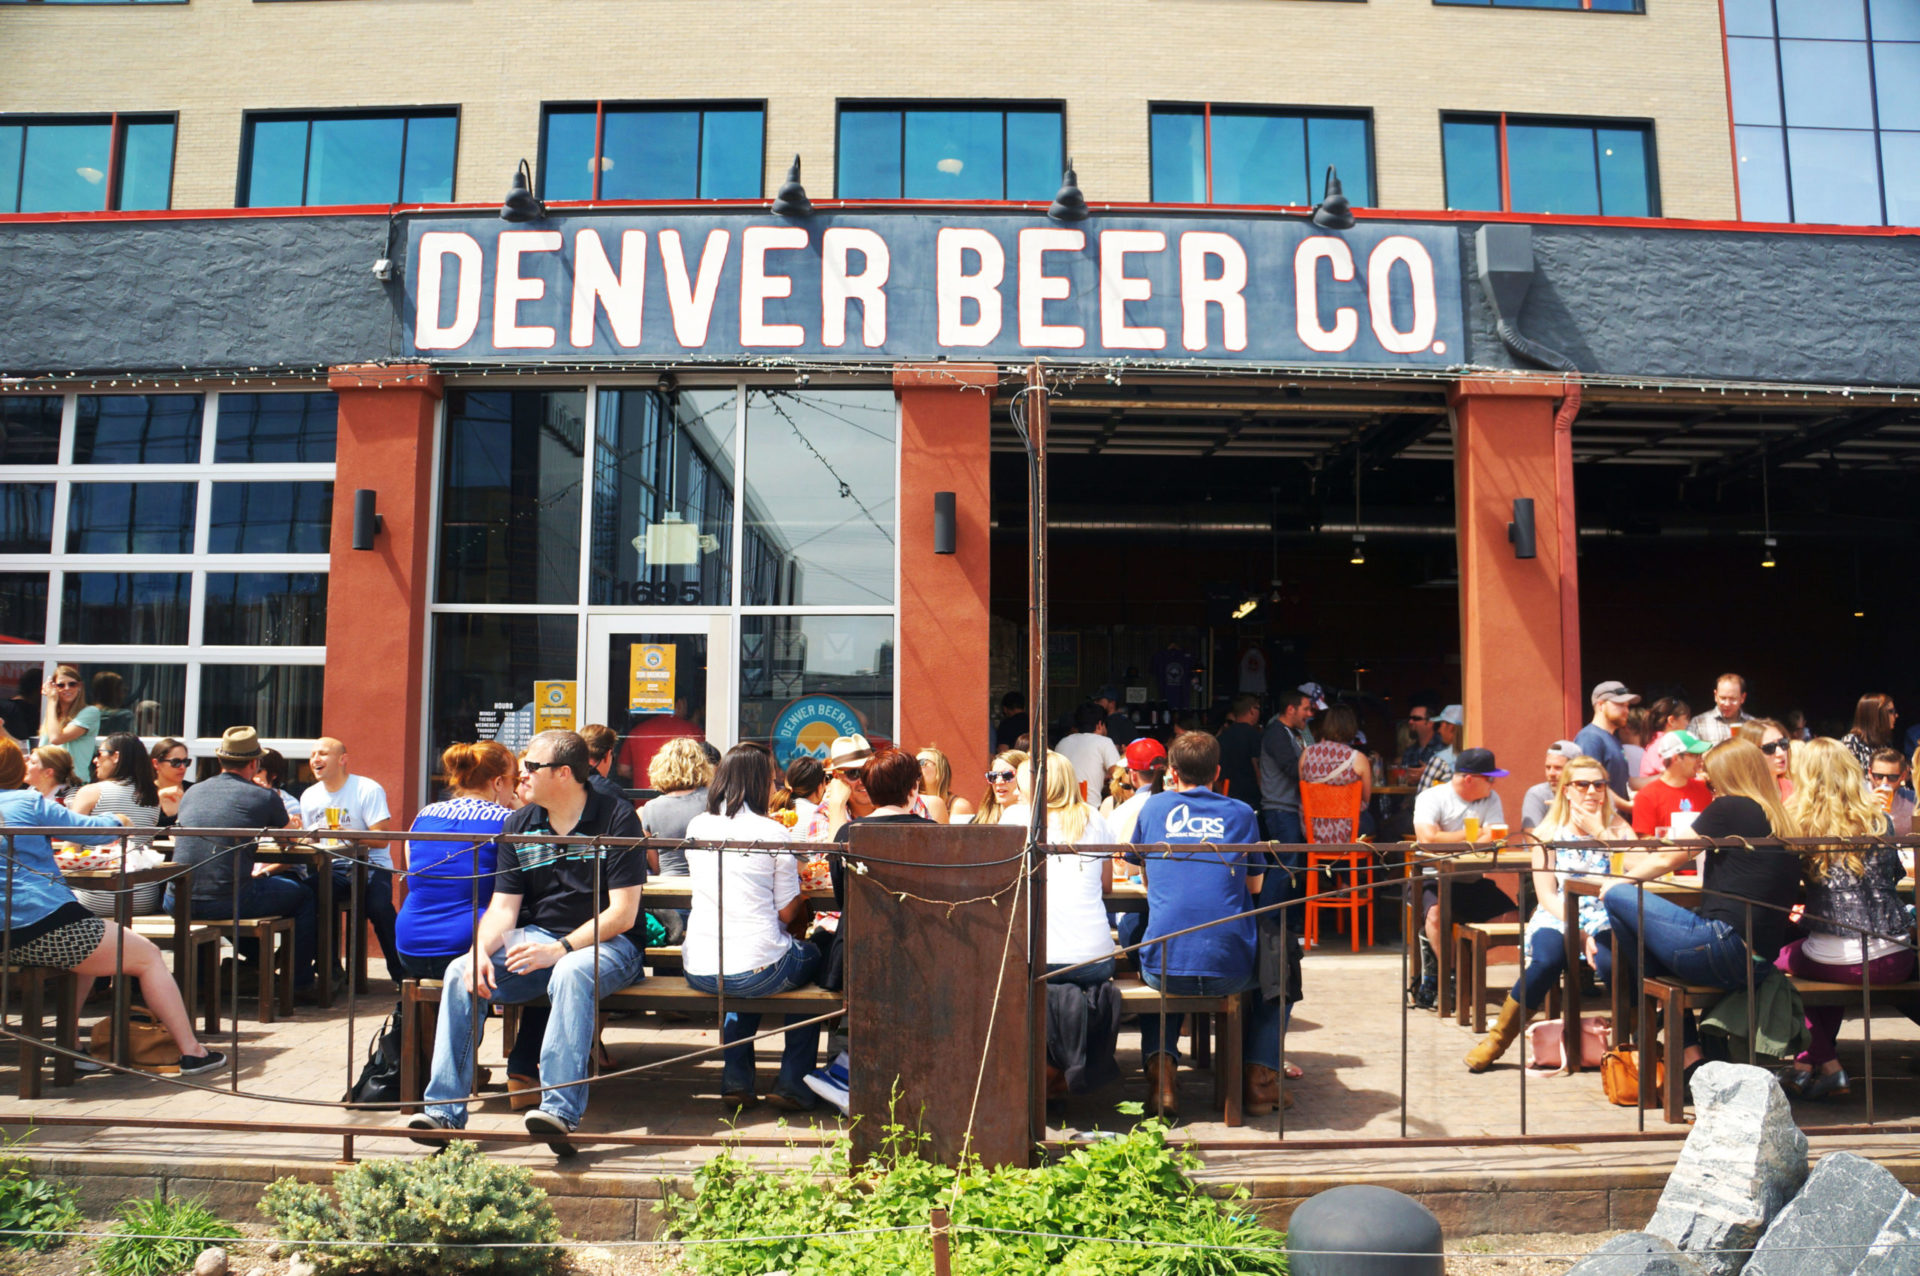 People socializing on the patio of Denver Beer Co.